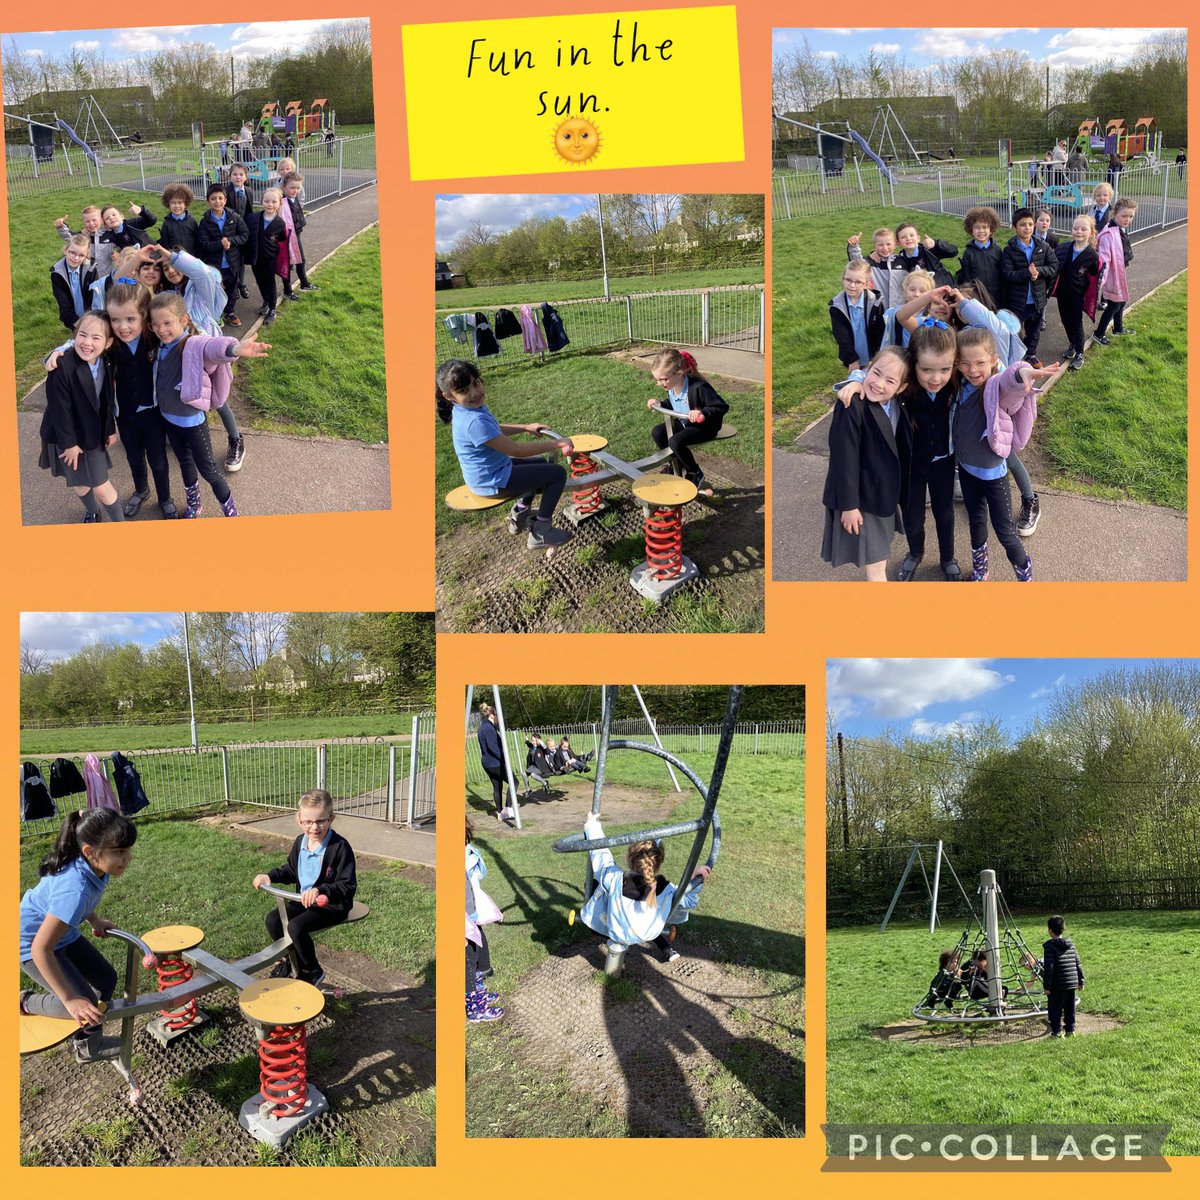 Primary 2B and Primary 2A had a great morning playing together at the swing park. #WellbeingWednesday 😊🌞😊🌞